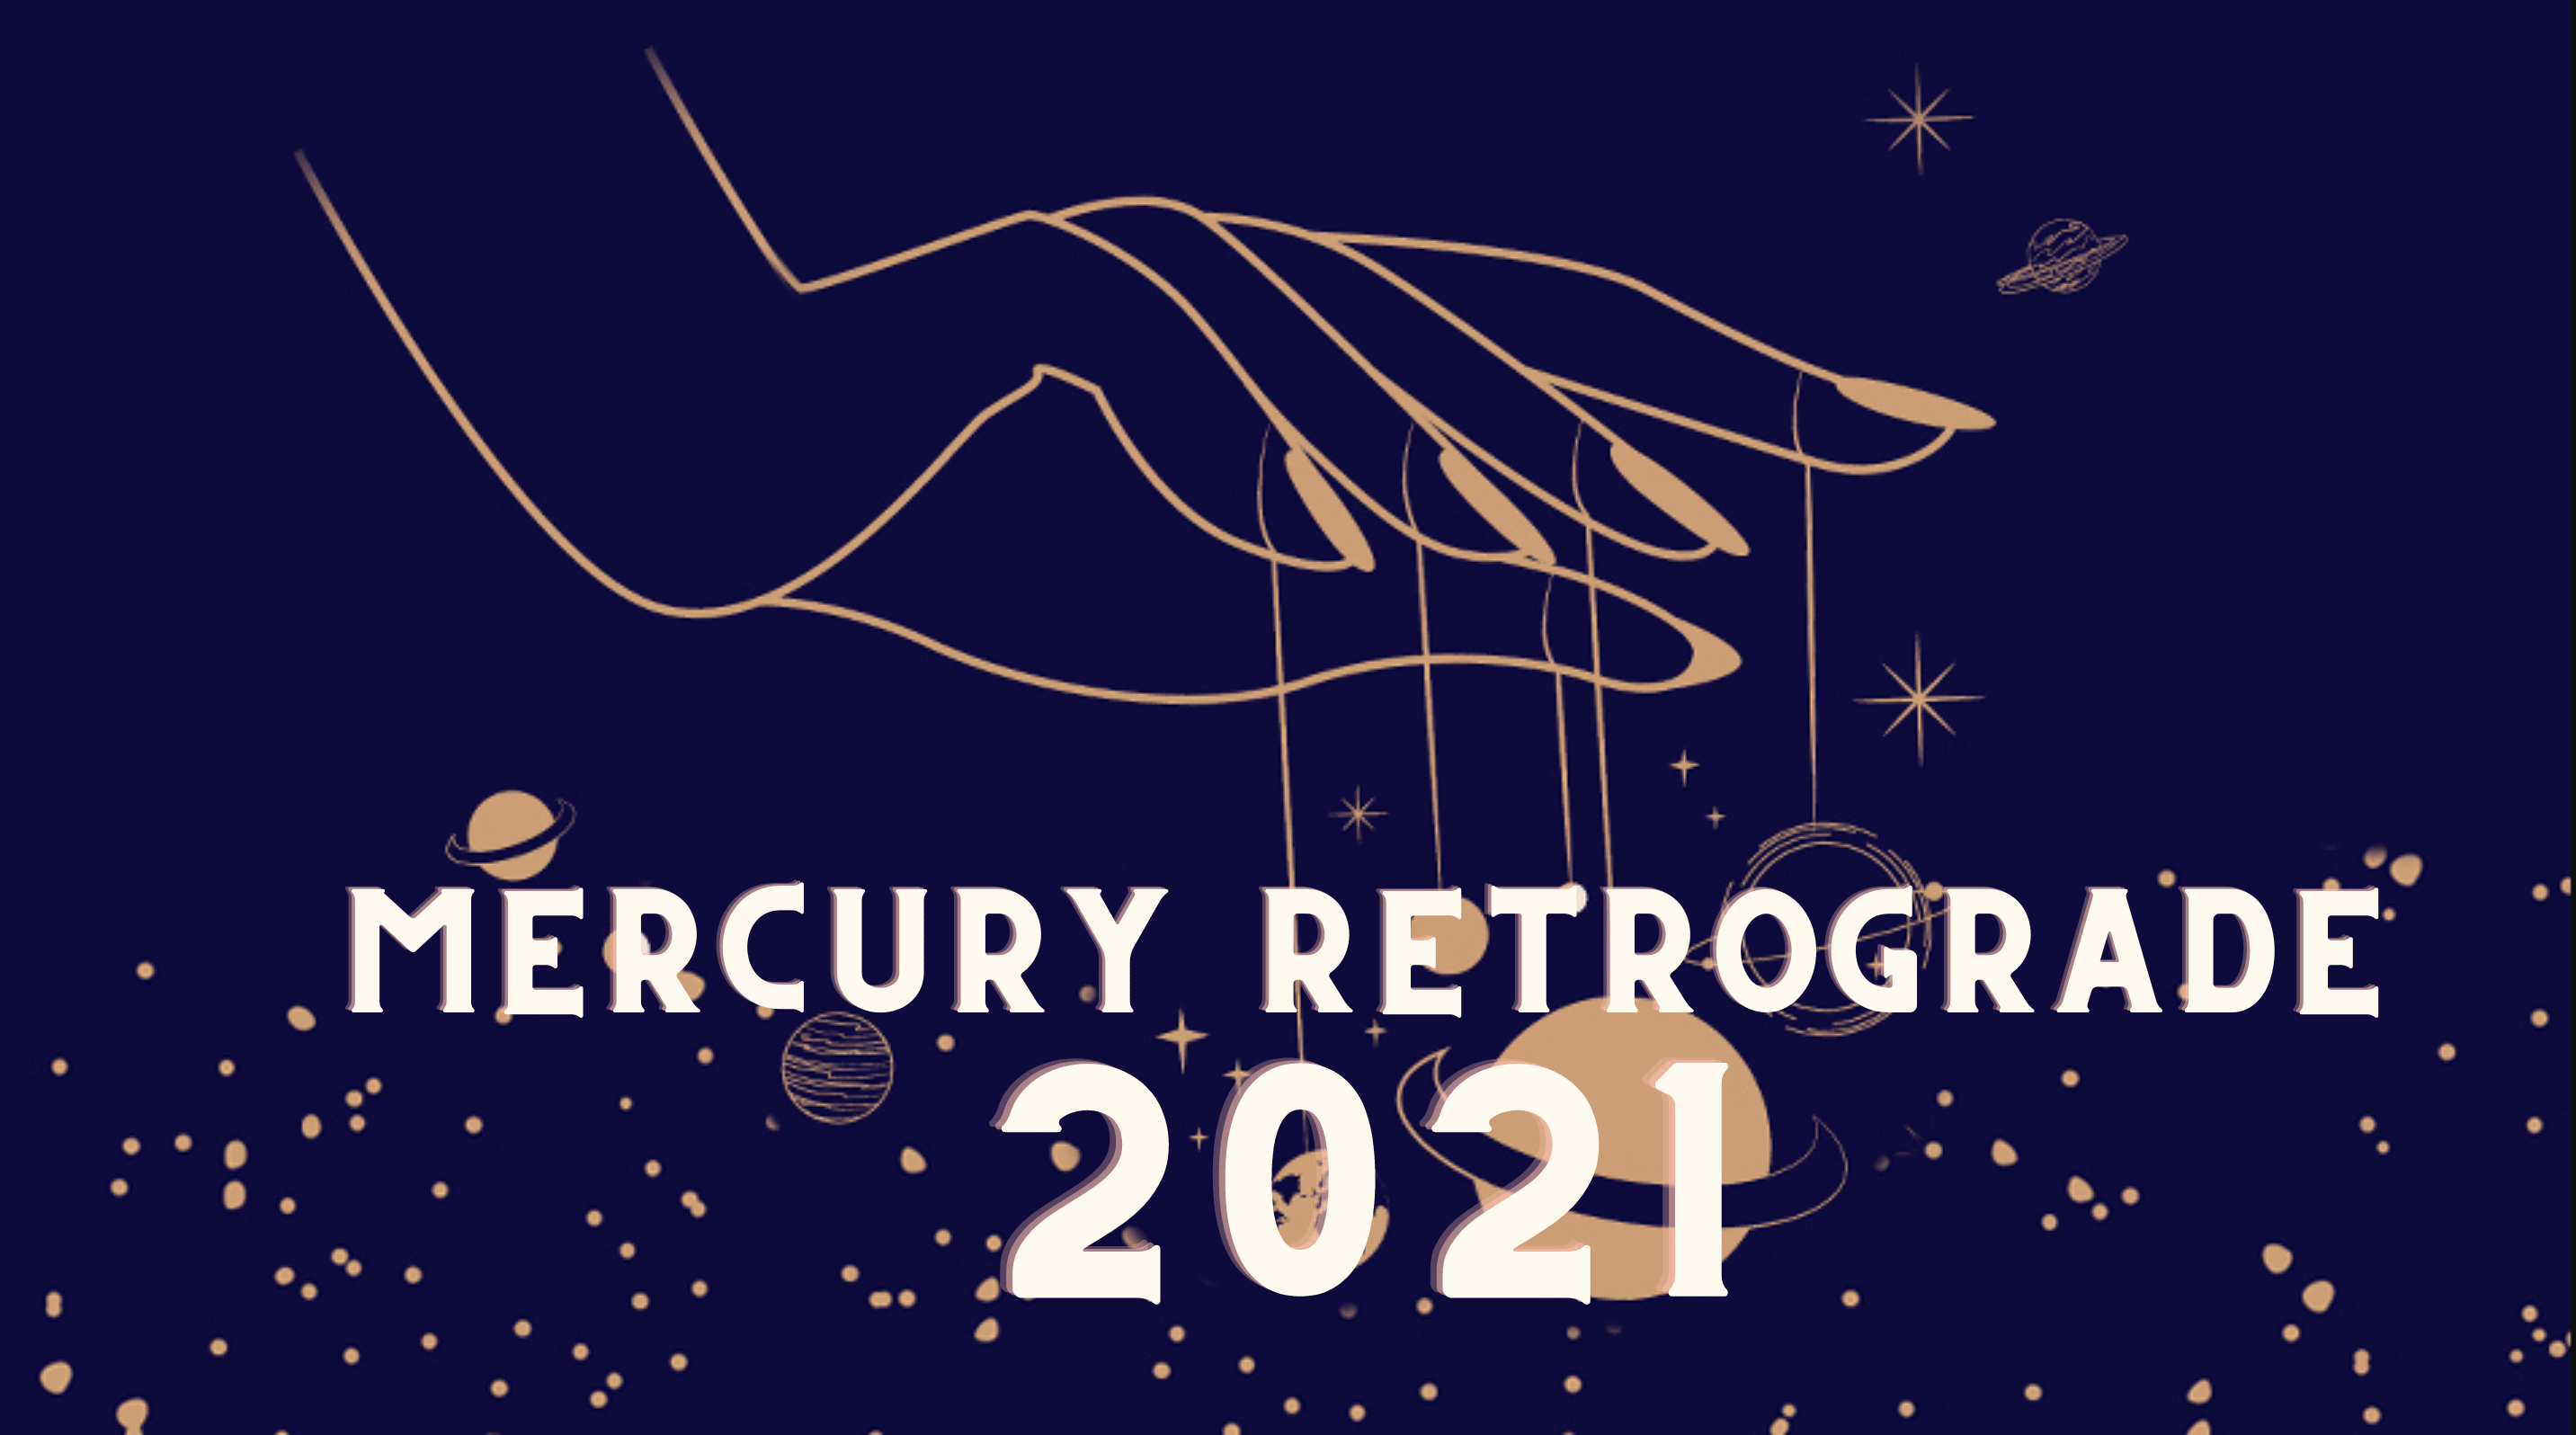 Mercury Retrograde 2021: What is it and how will affect each zodiac